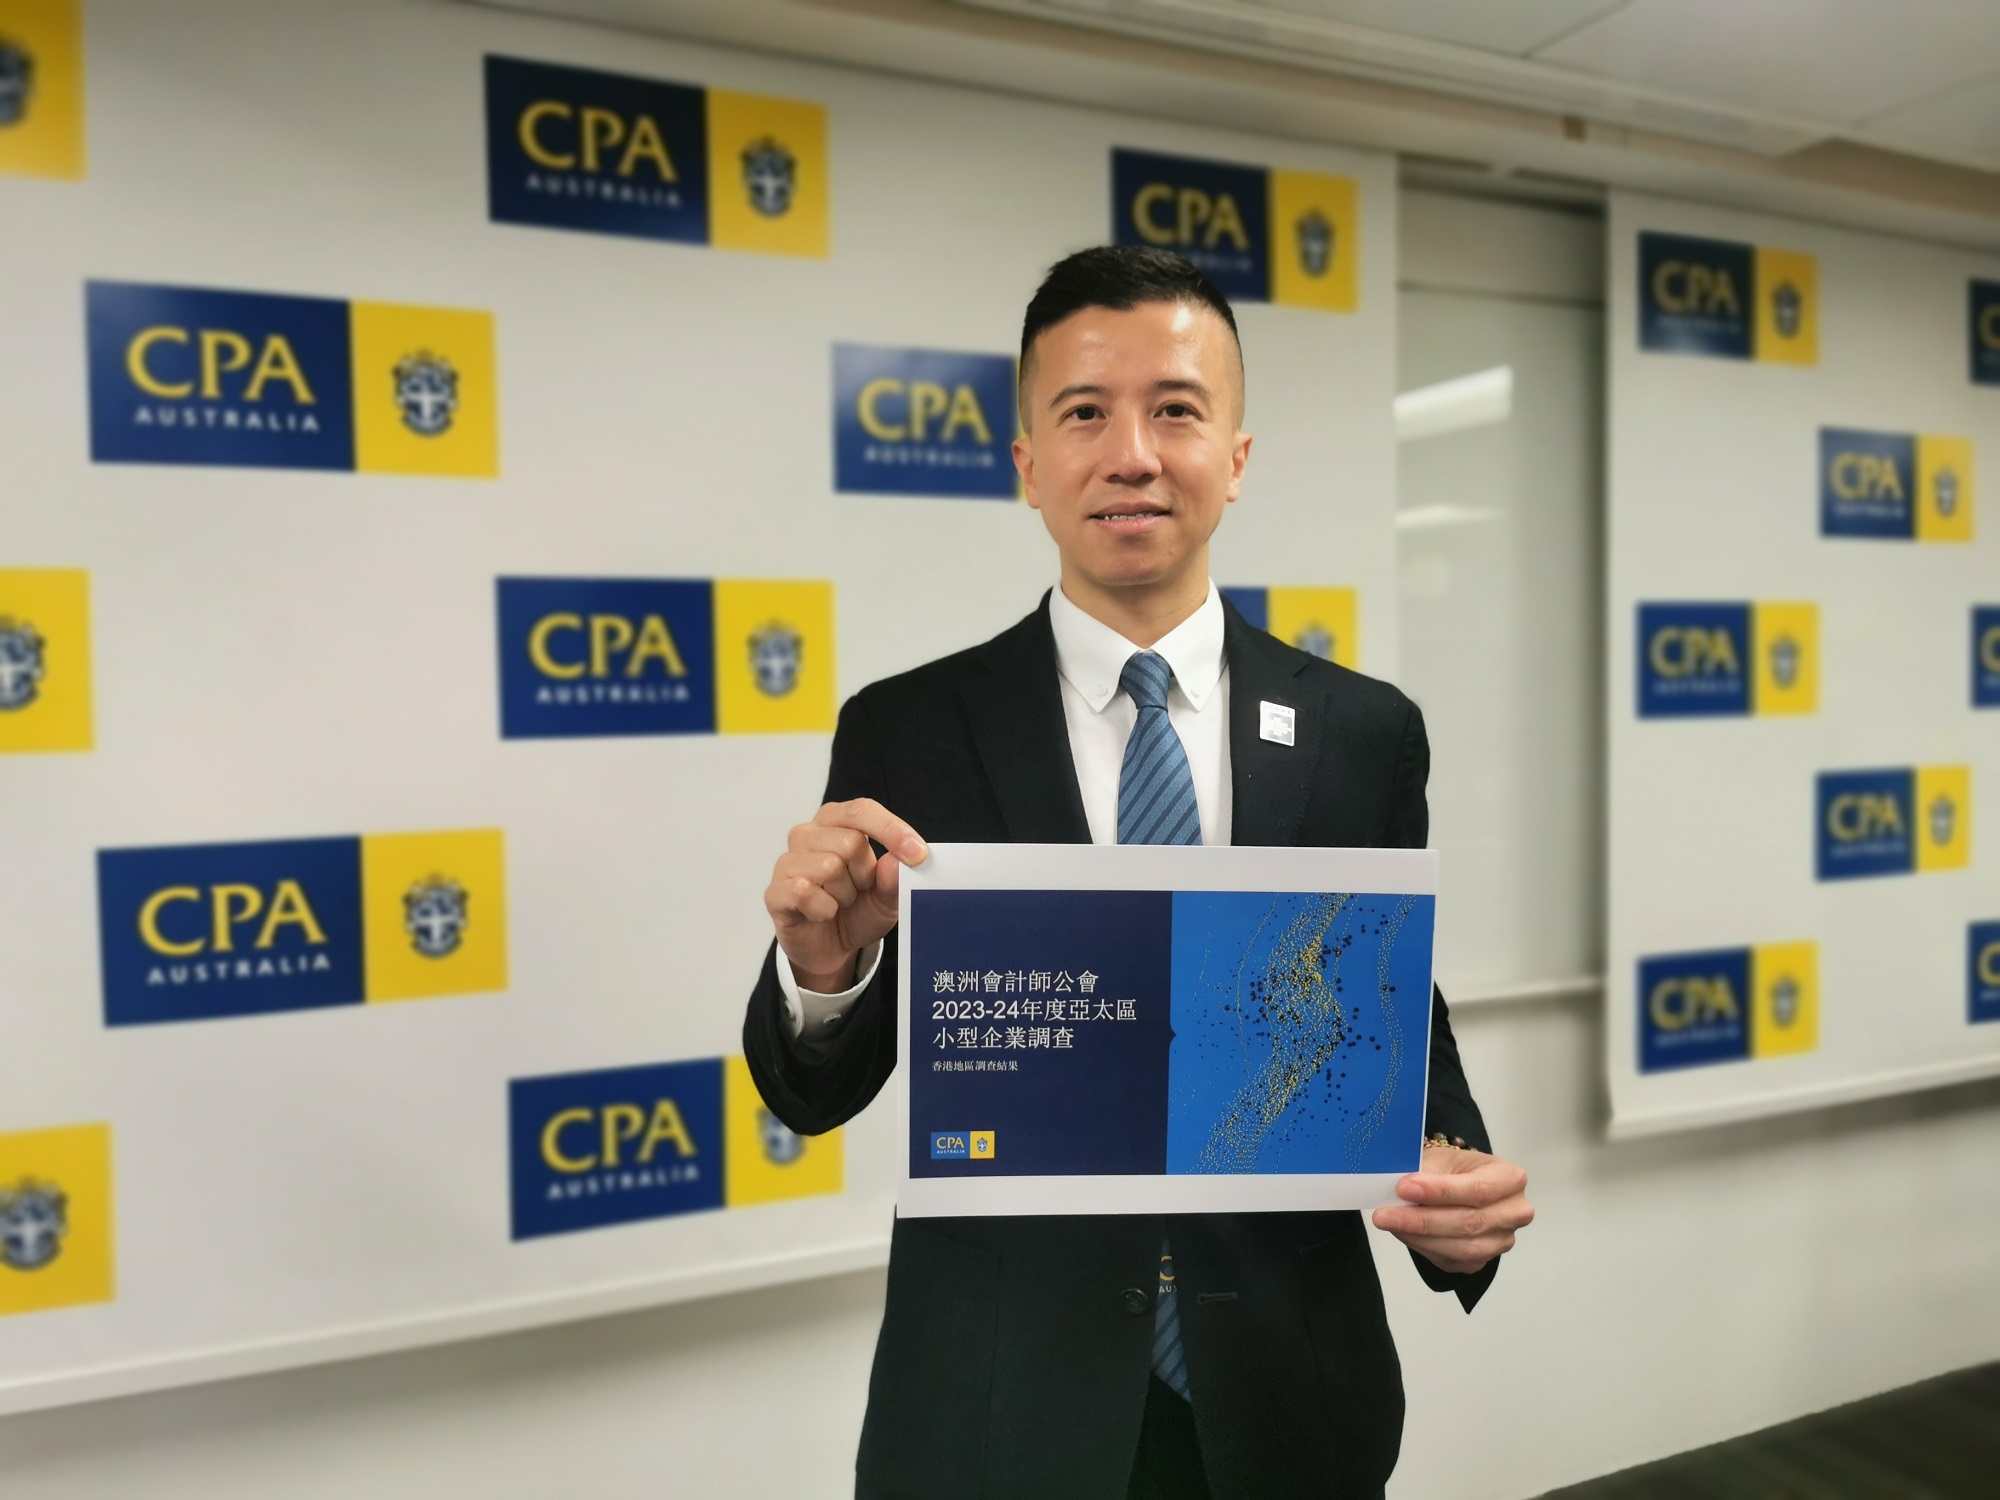 Mr Cliff Ip, Divisional President of CPA Australia 2024 in Greater China